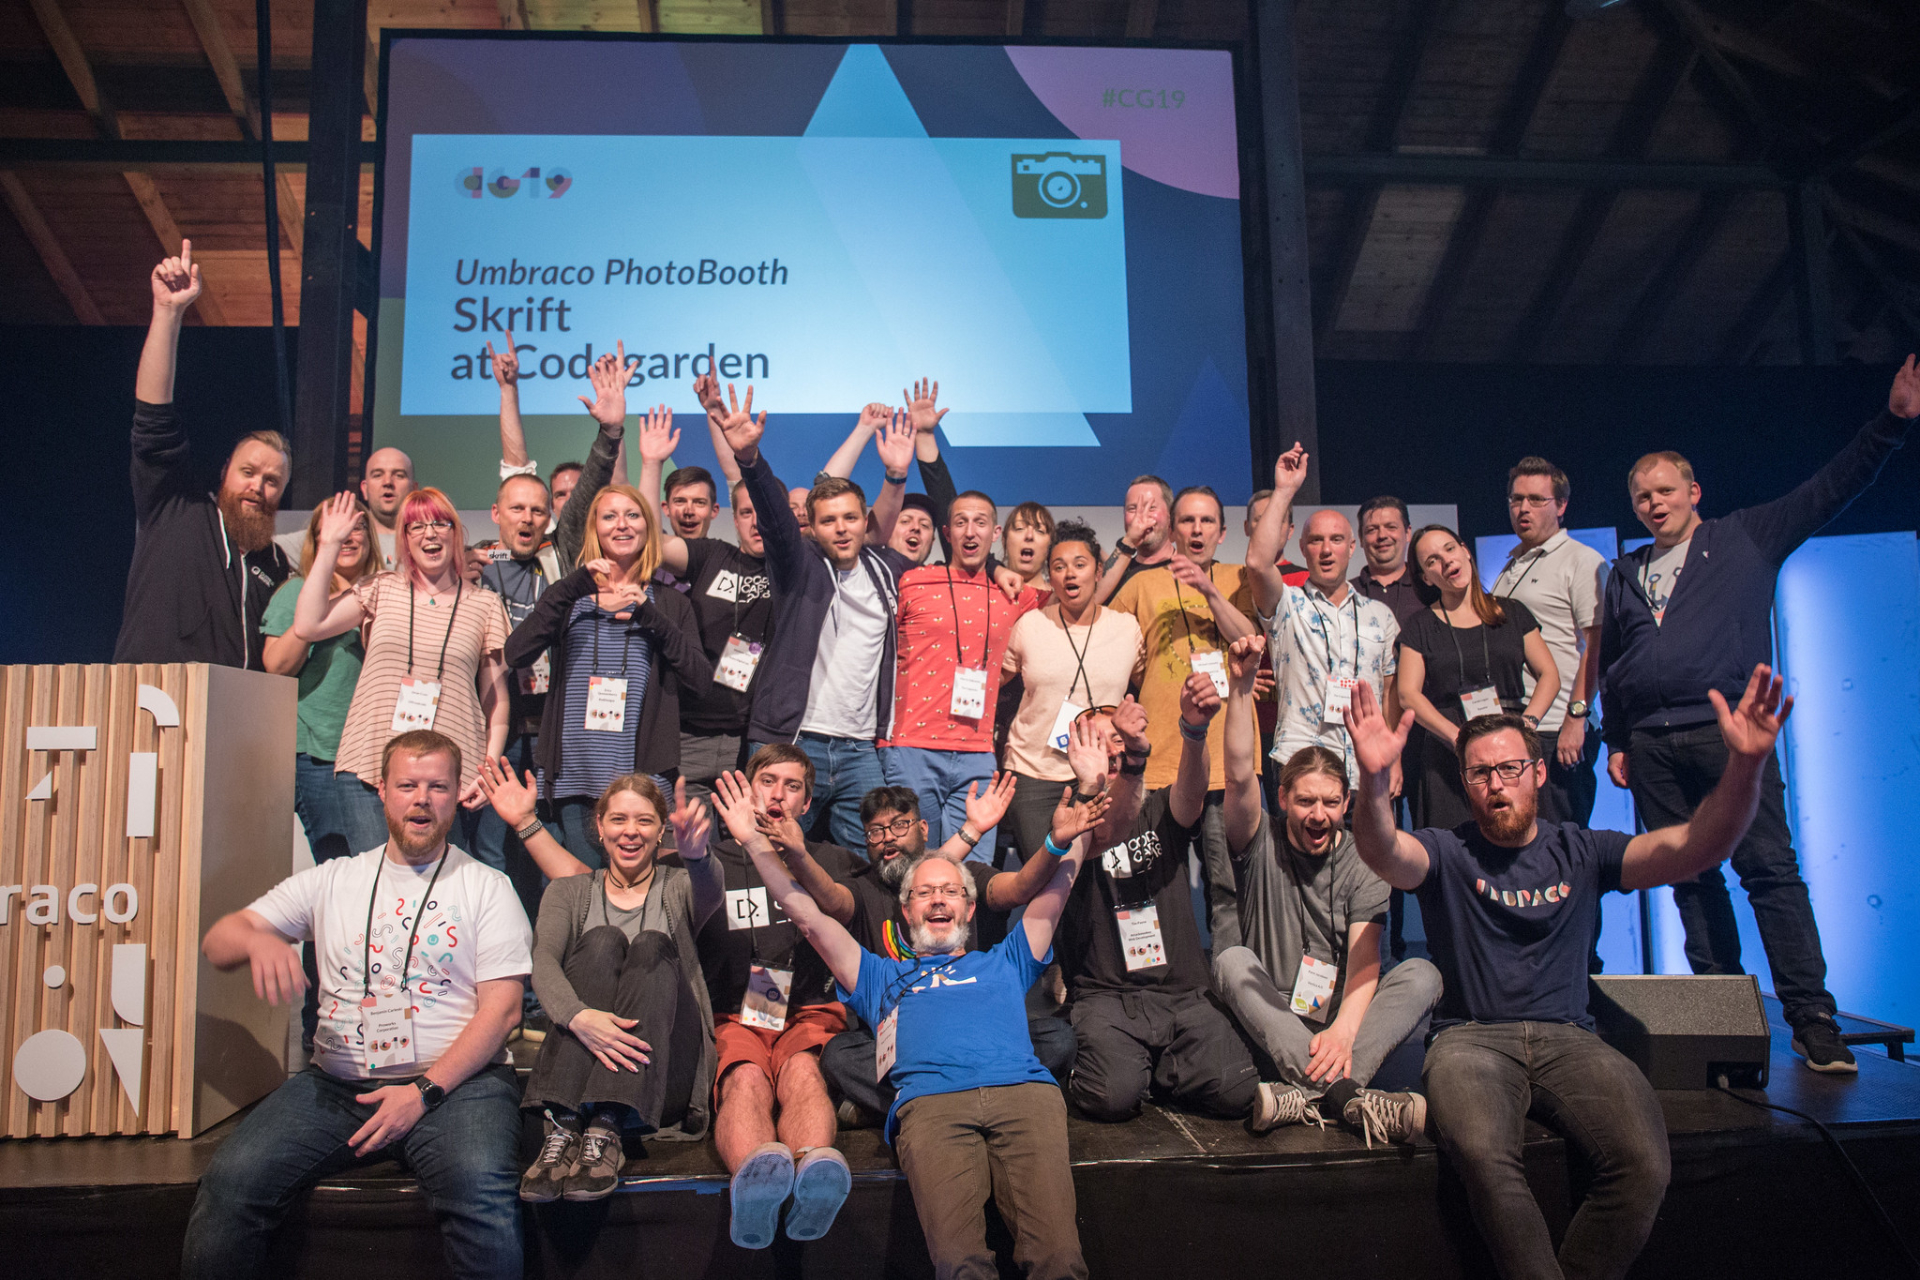 Authors who have written for the popular Umbraco magazine called skrift, all gathered on stage for a group photo.